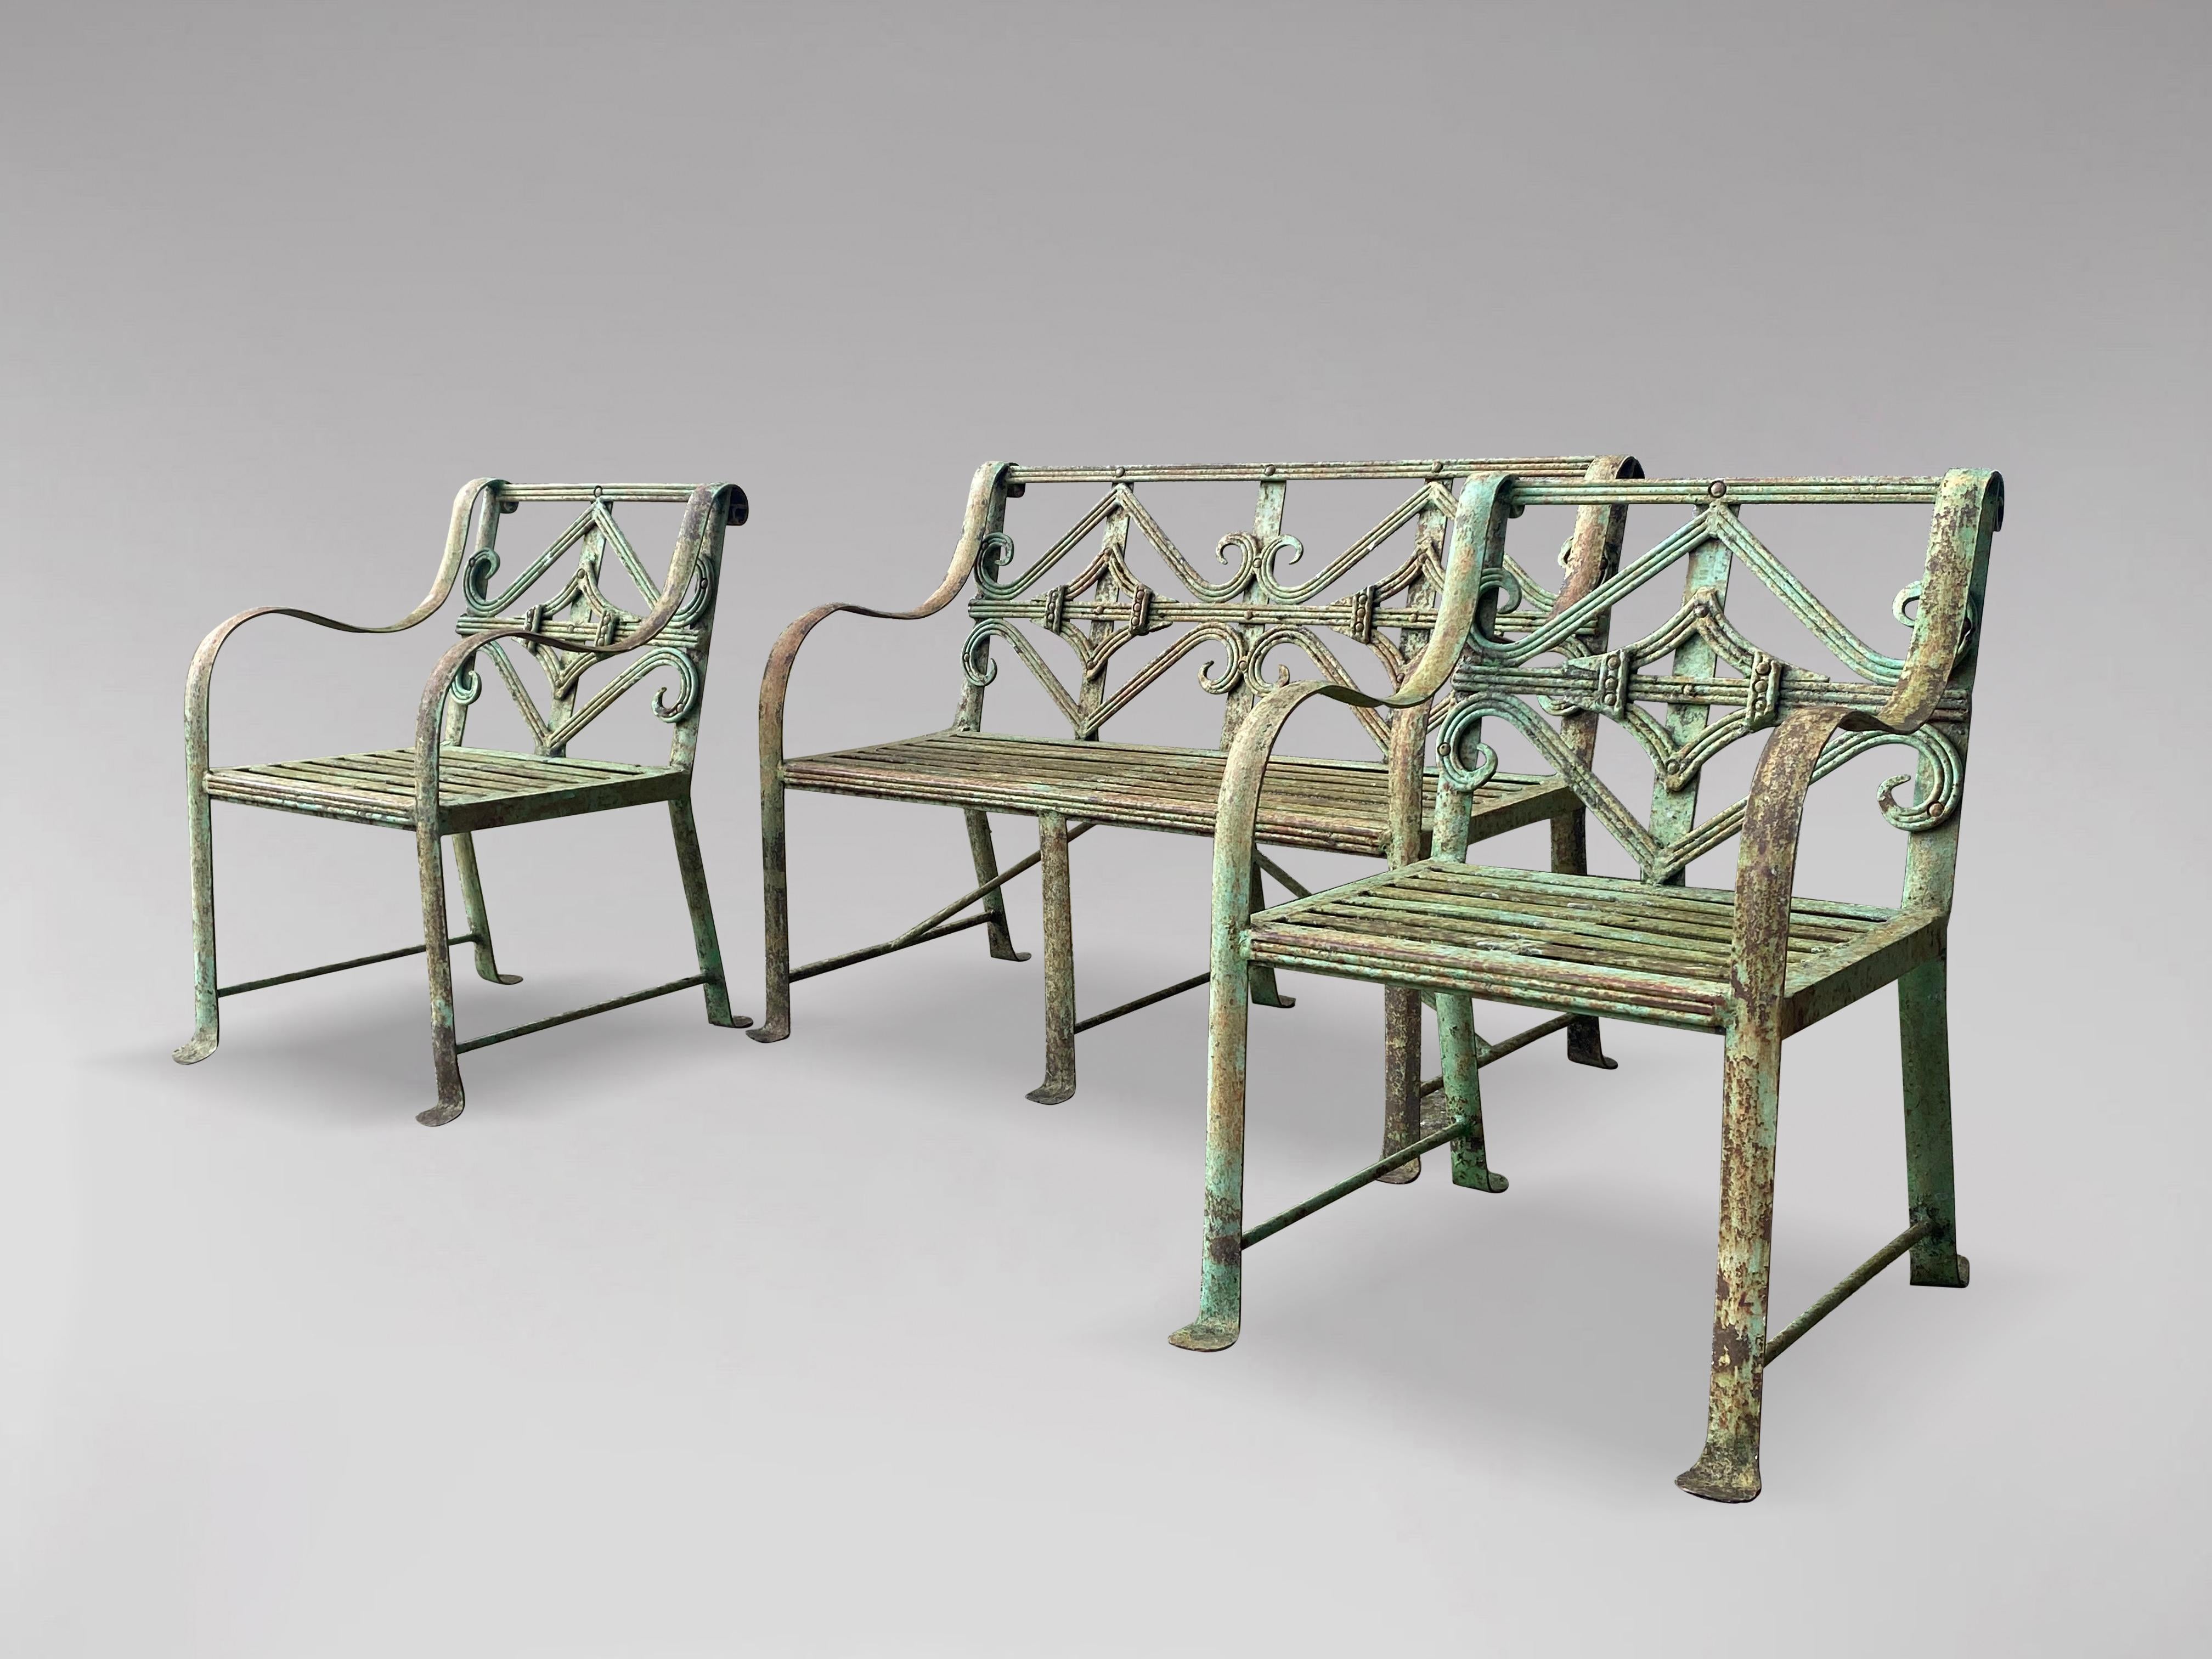 Victorian 19th Century Green Painted Wrought Iron Child's Garden Suite